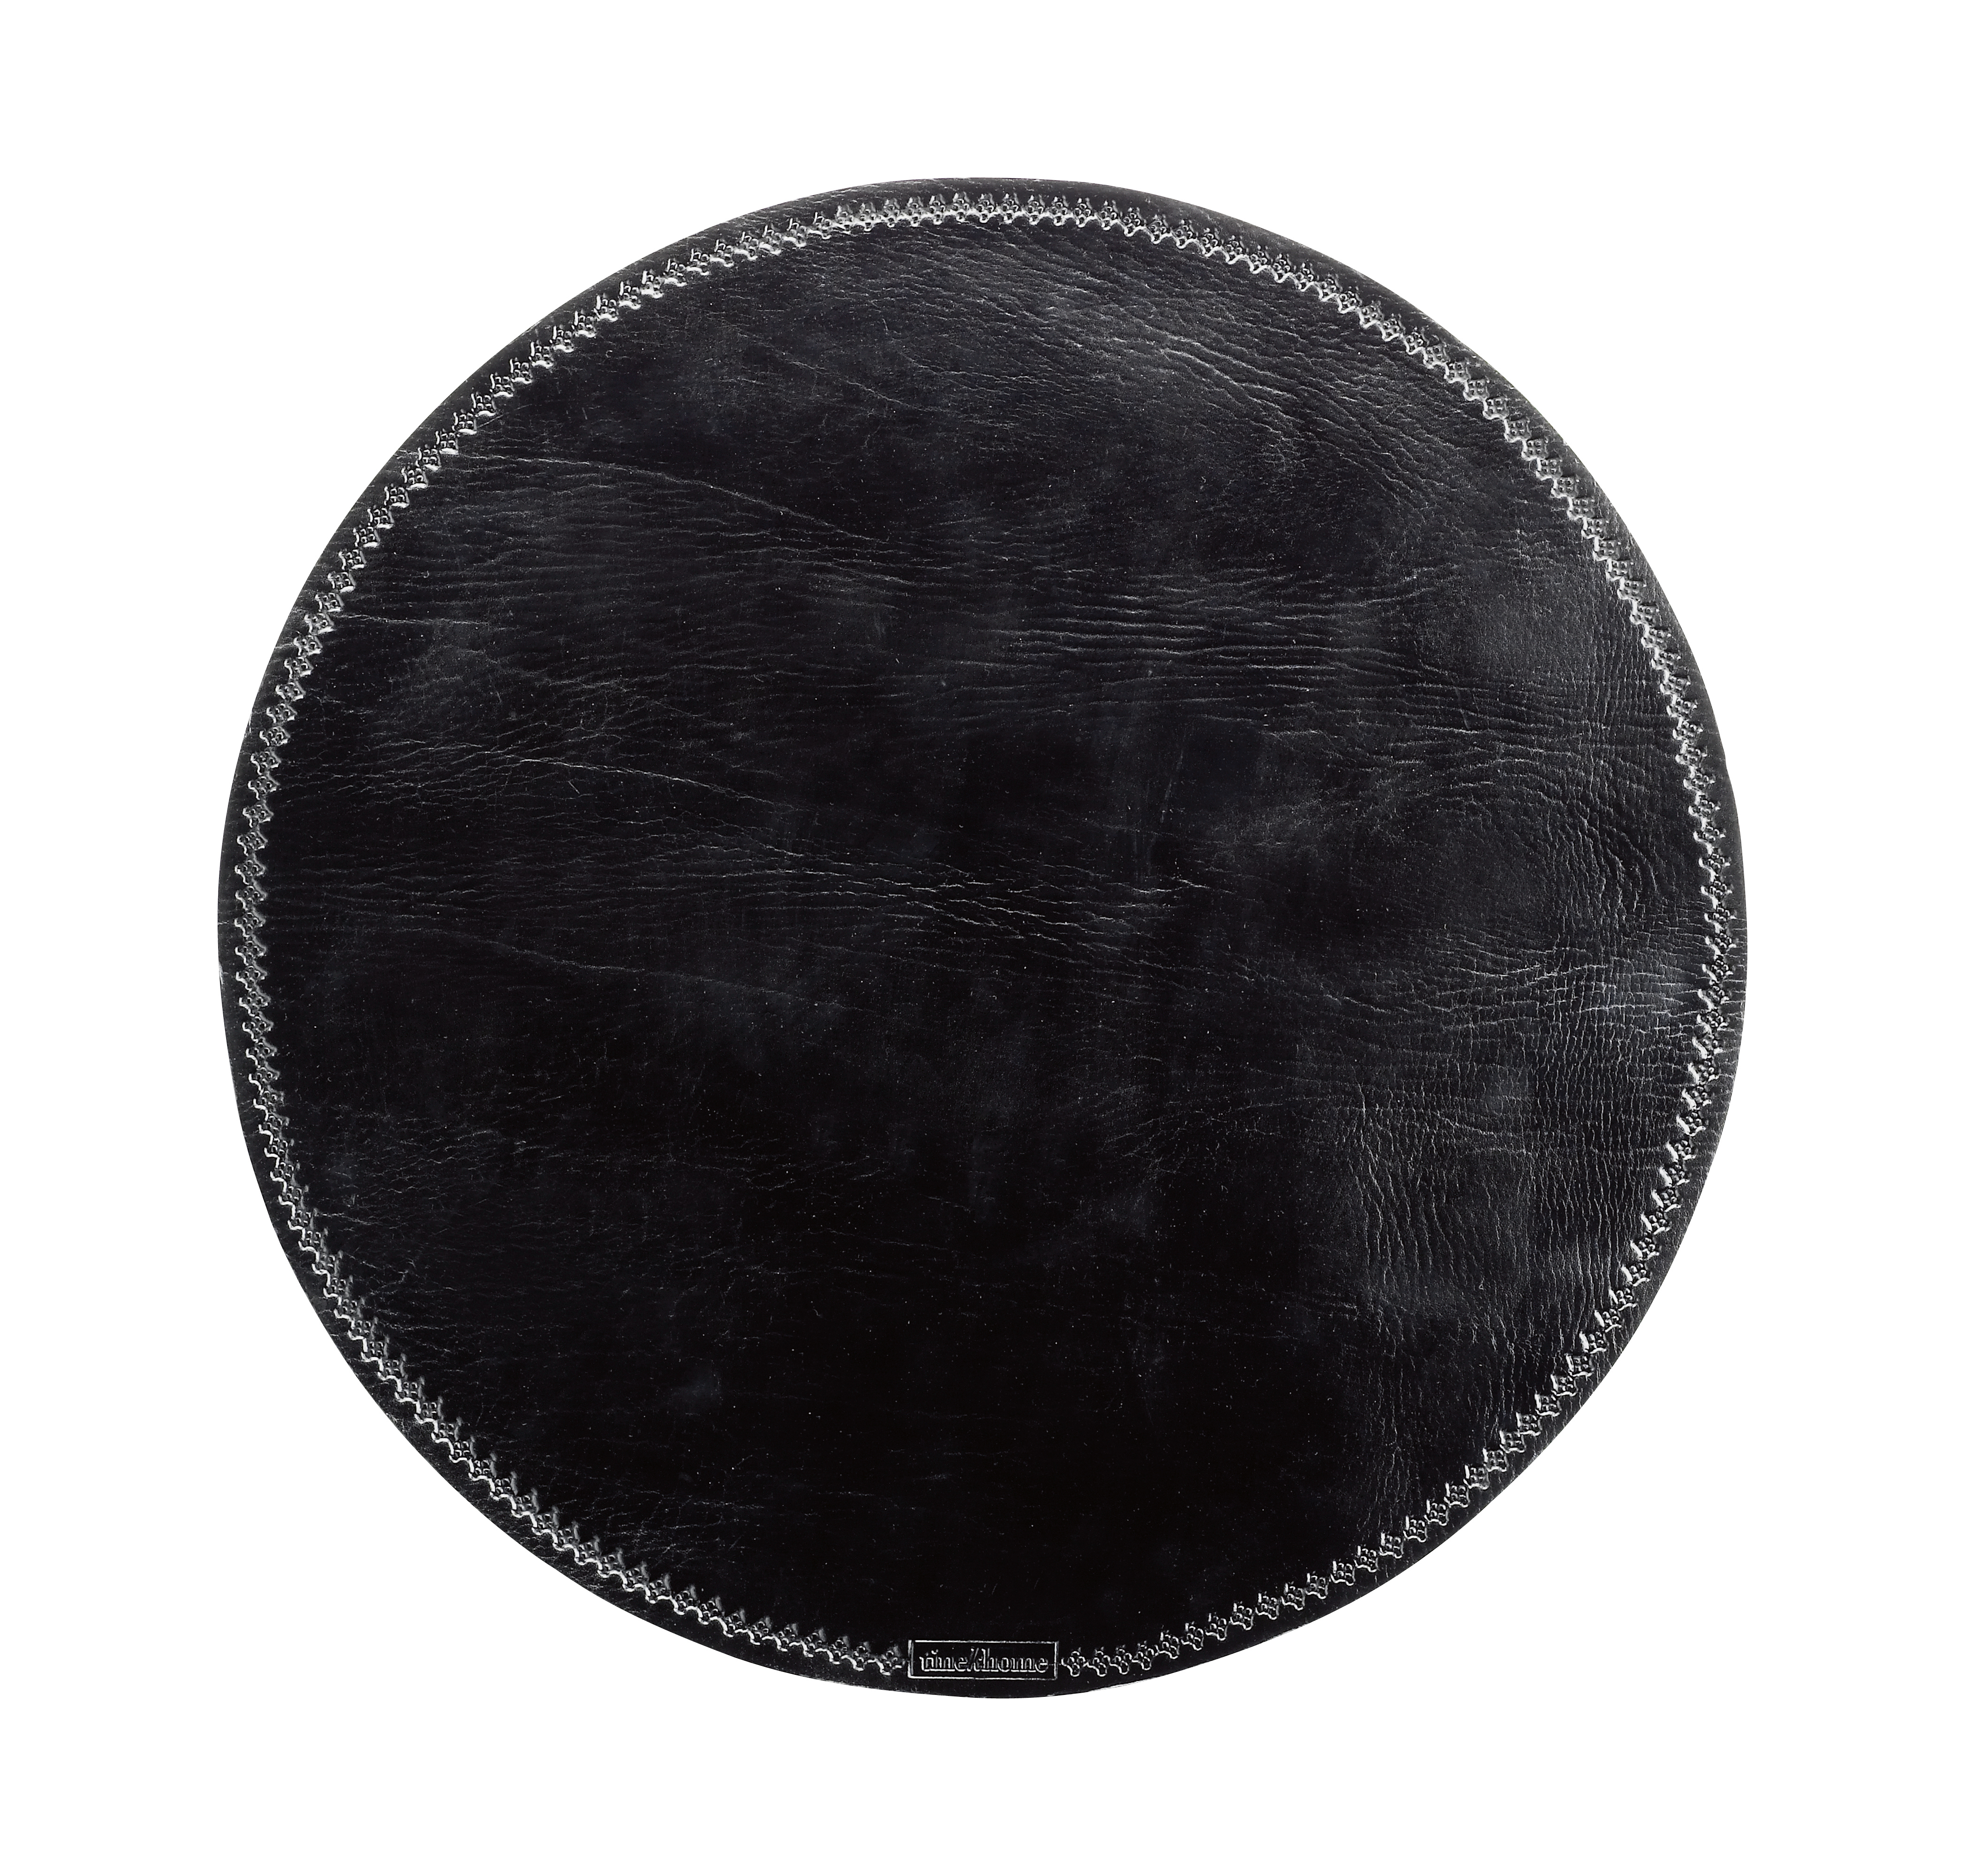 Round Placemat In Black Leather, Black Leather Table